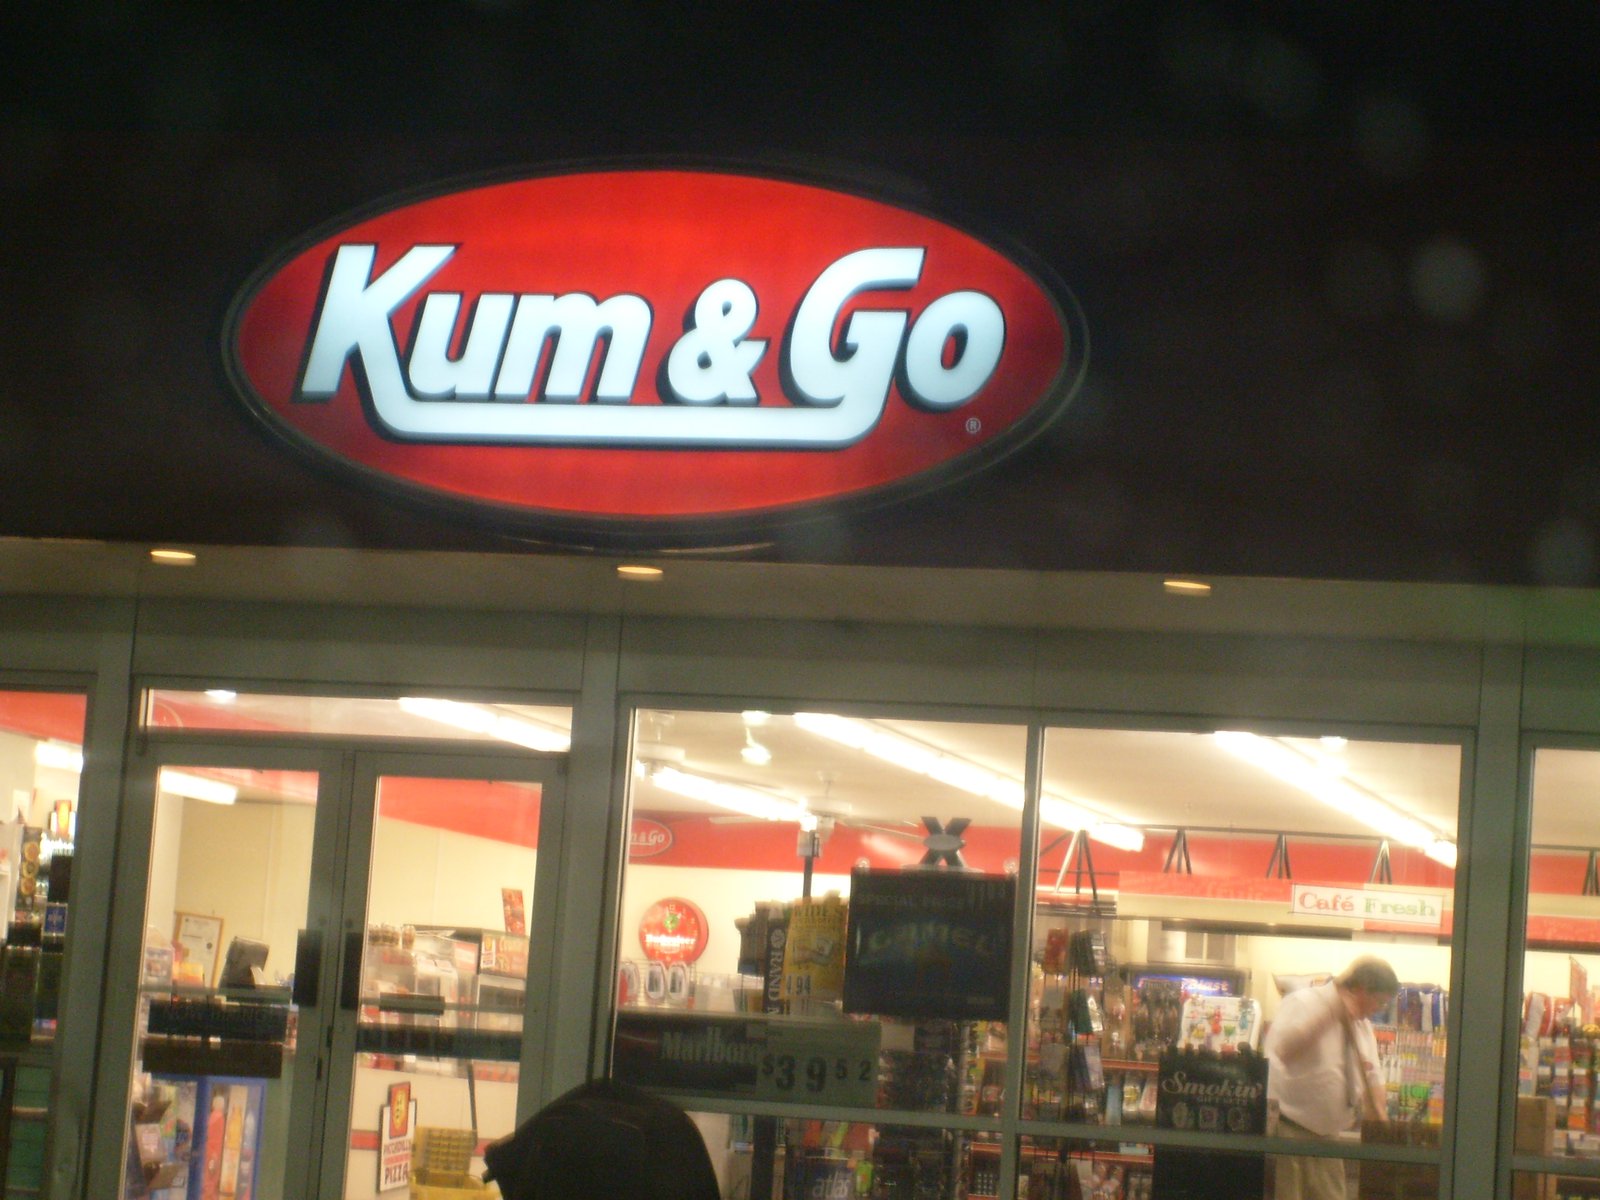 I see your kum and go...